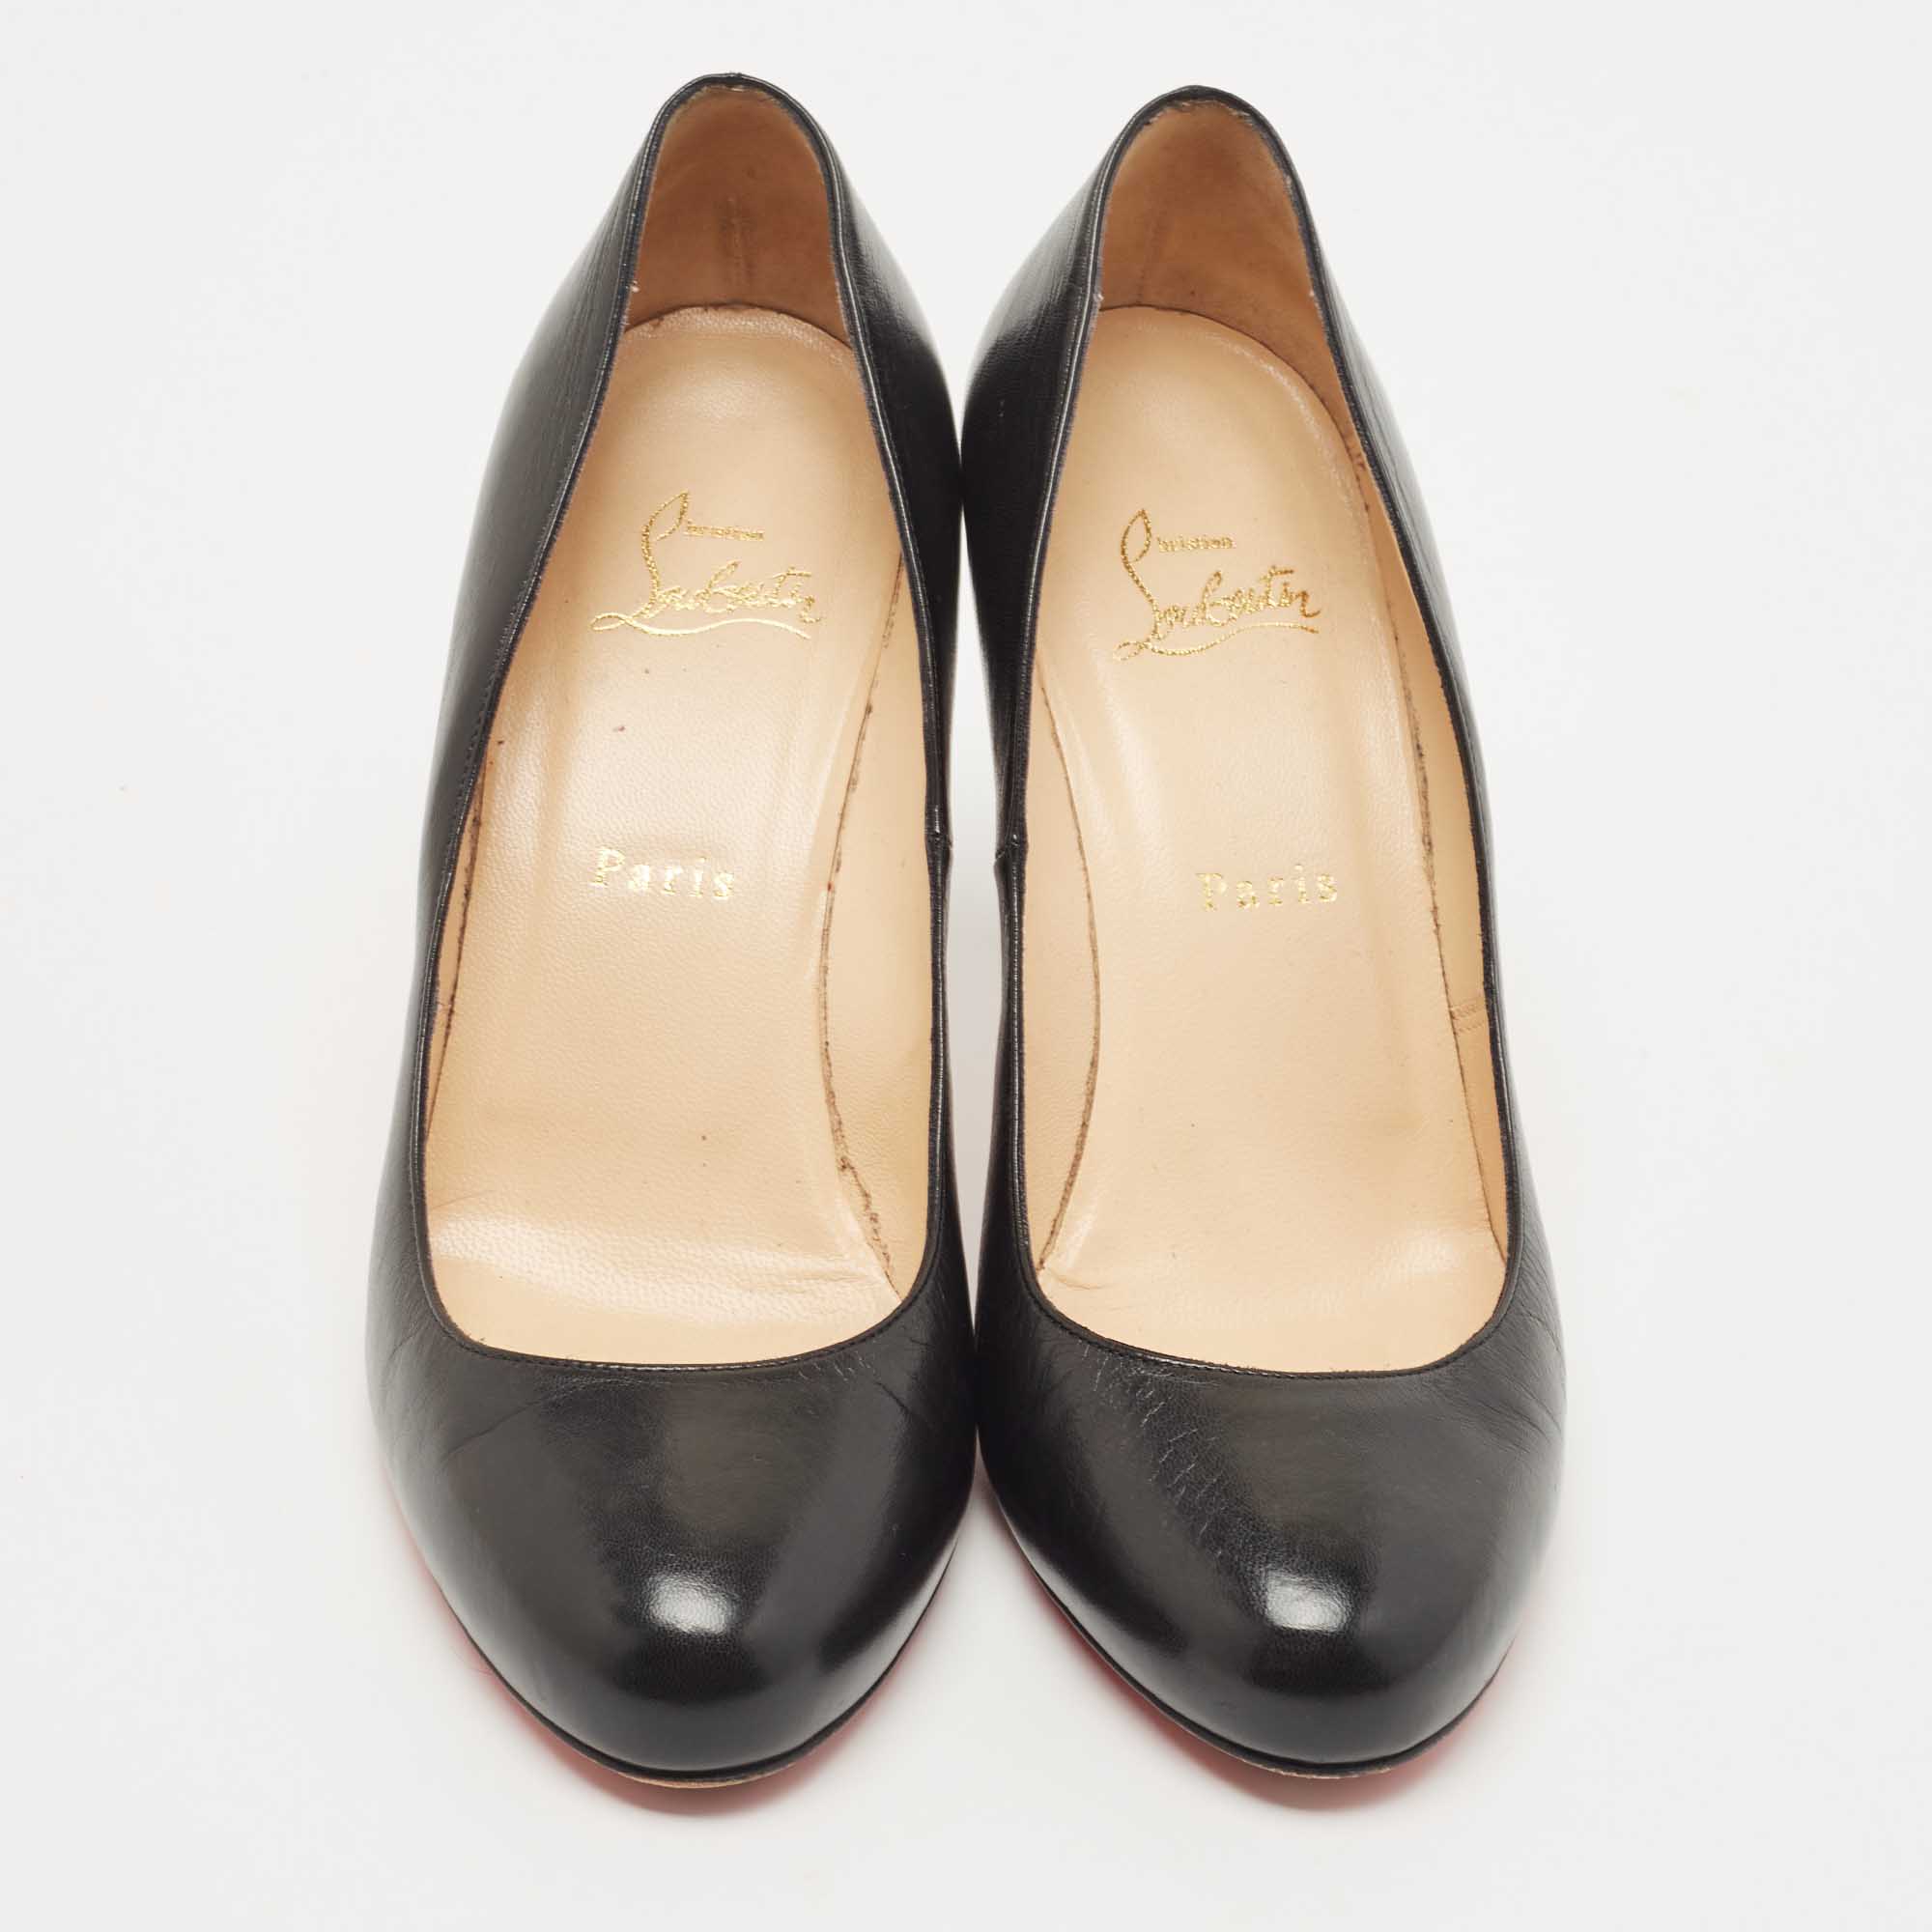 Christian Louboutin Black Leather New Simple Pumps Size 39